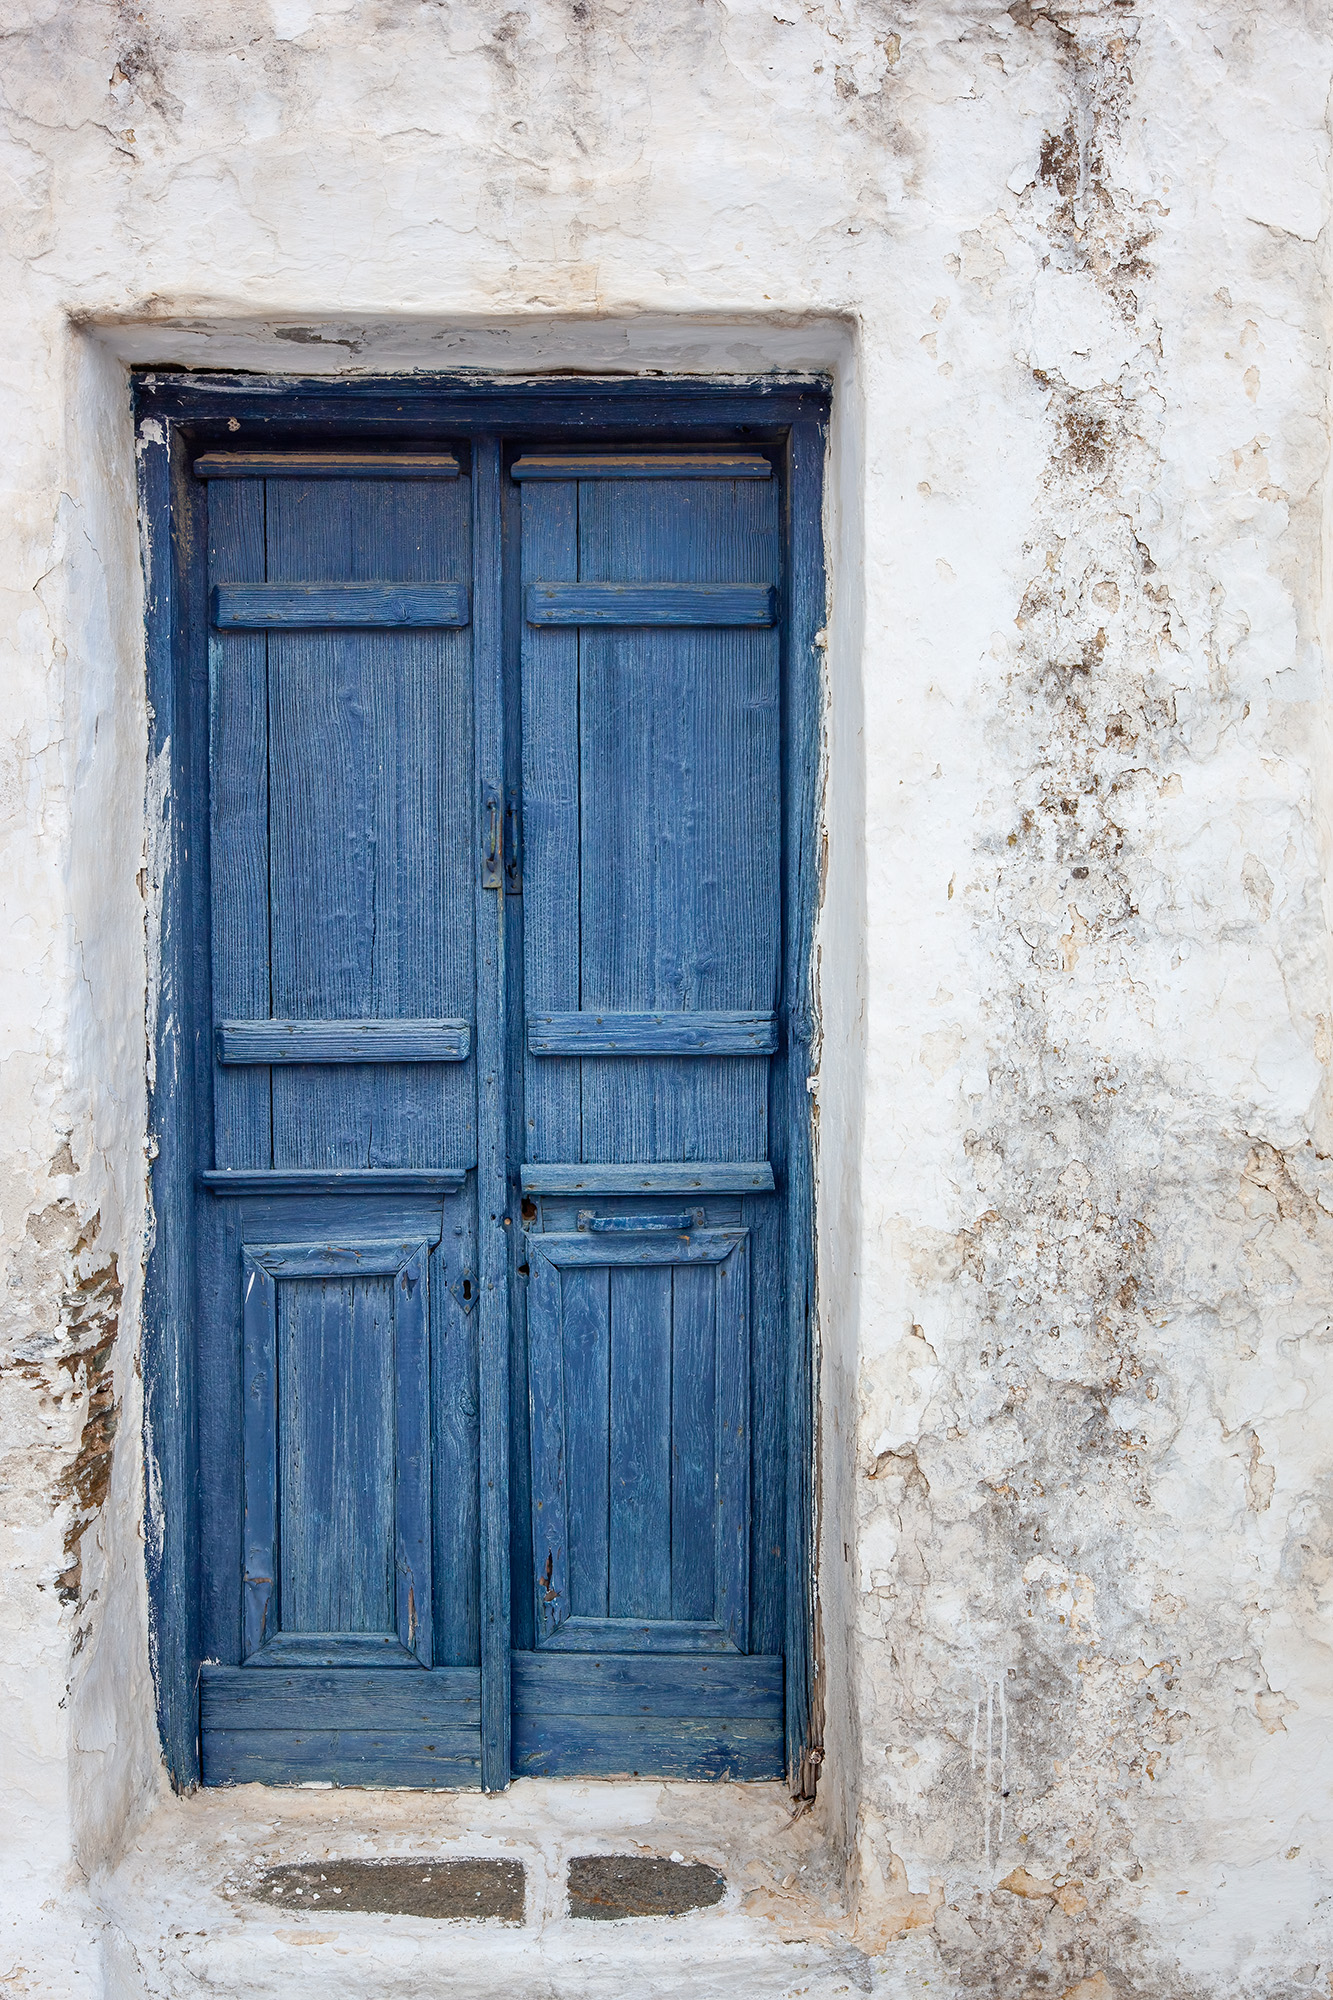 In this striking vertical composition, we encounter a beautifully weathered blue door set within the rugged charm of Sifnos...